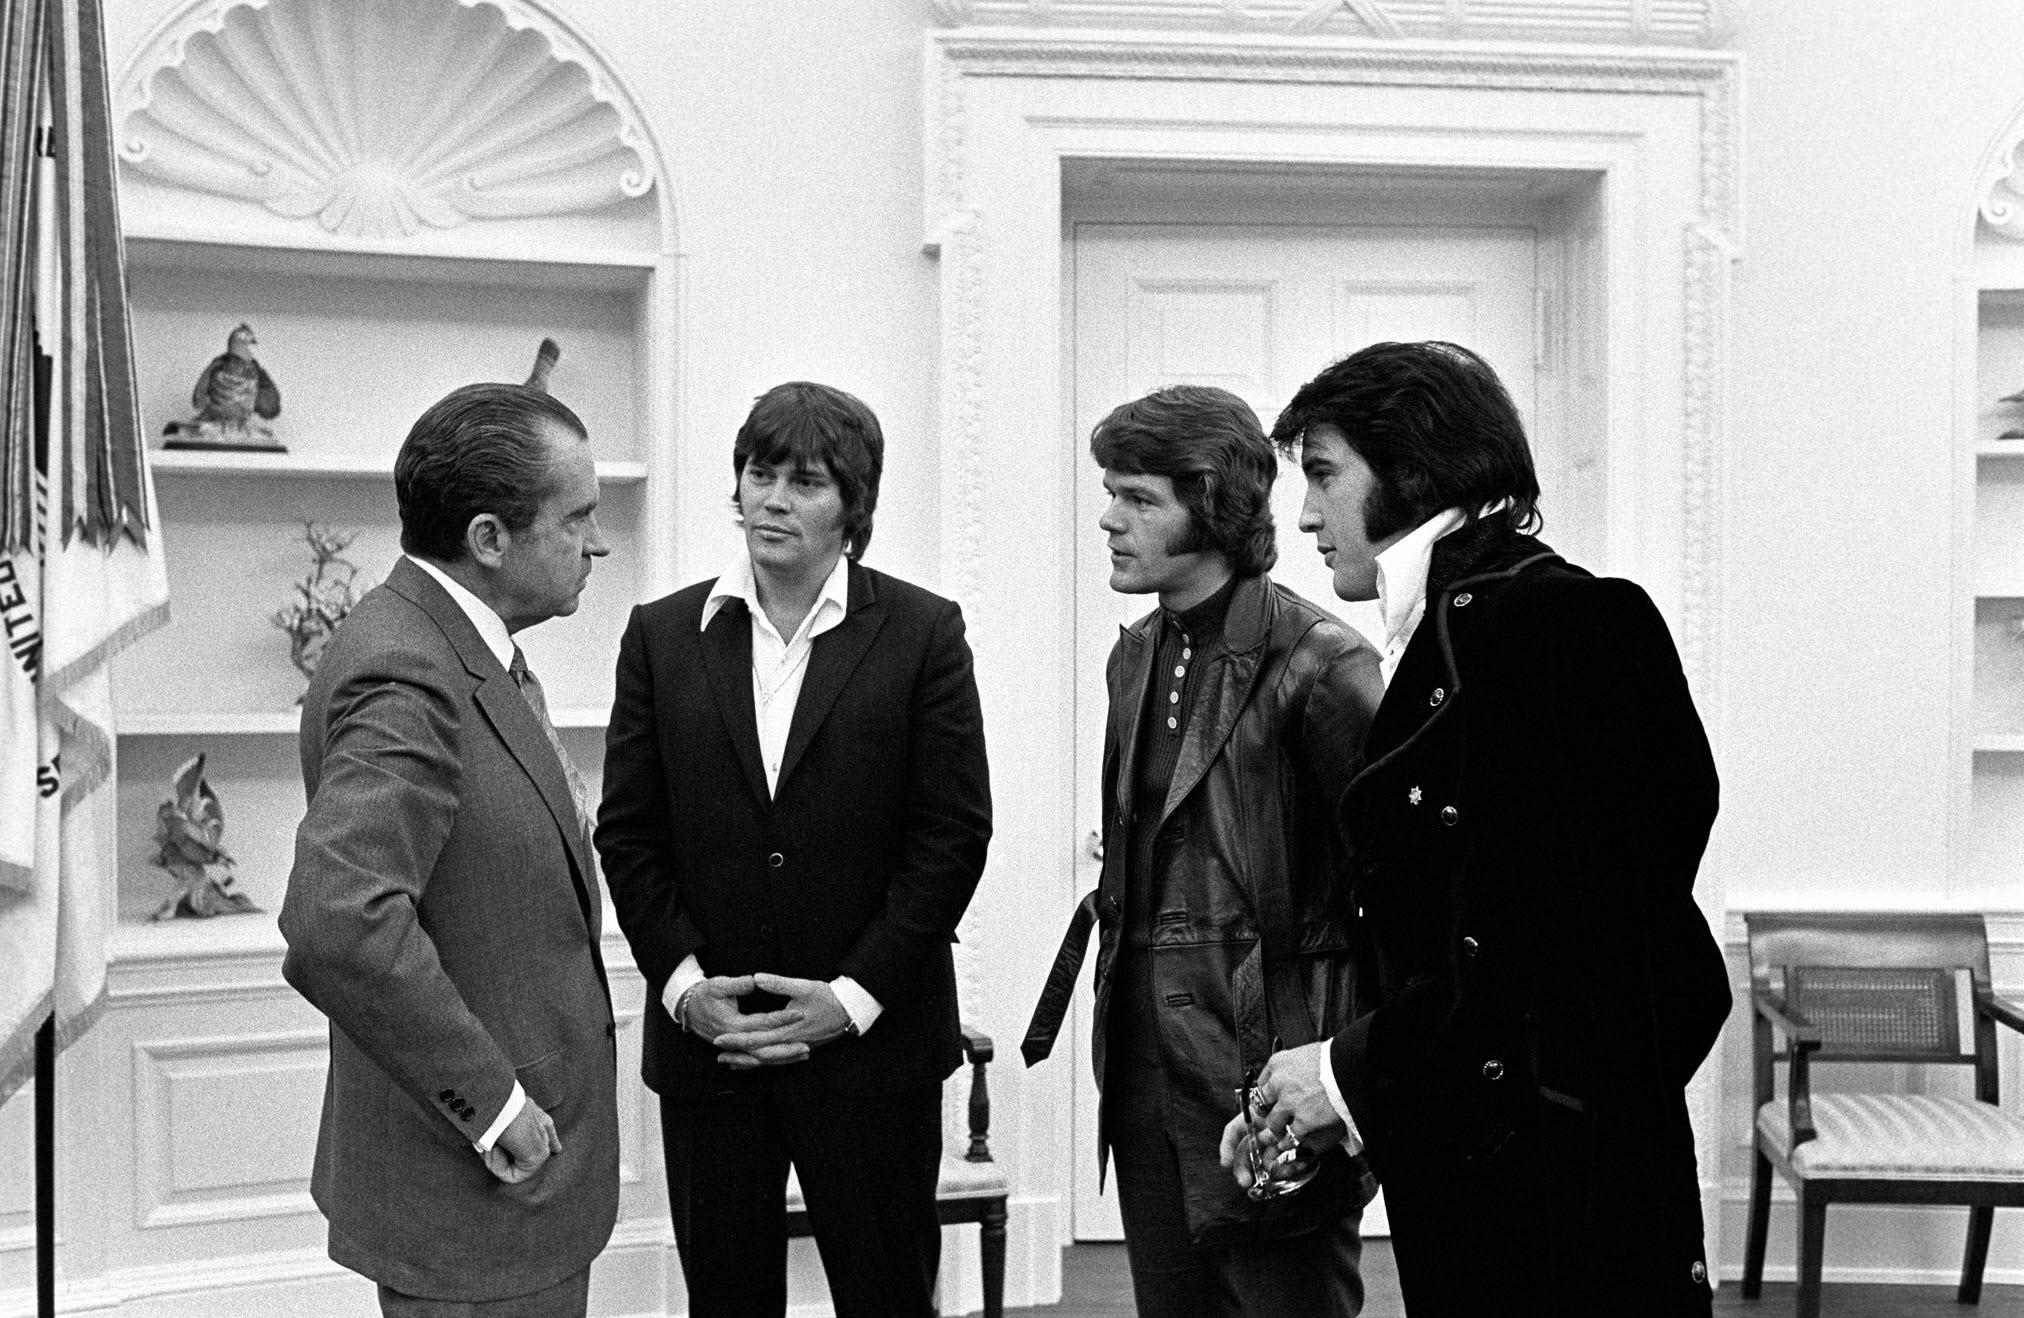 Richard Nixon meets with Elvis entourage Delbert 'Sonny' West, and Jerry Schilling, to receive a badge from the Bureau of Narcotics, 1970.jpeg